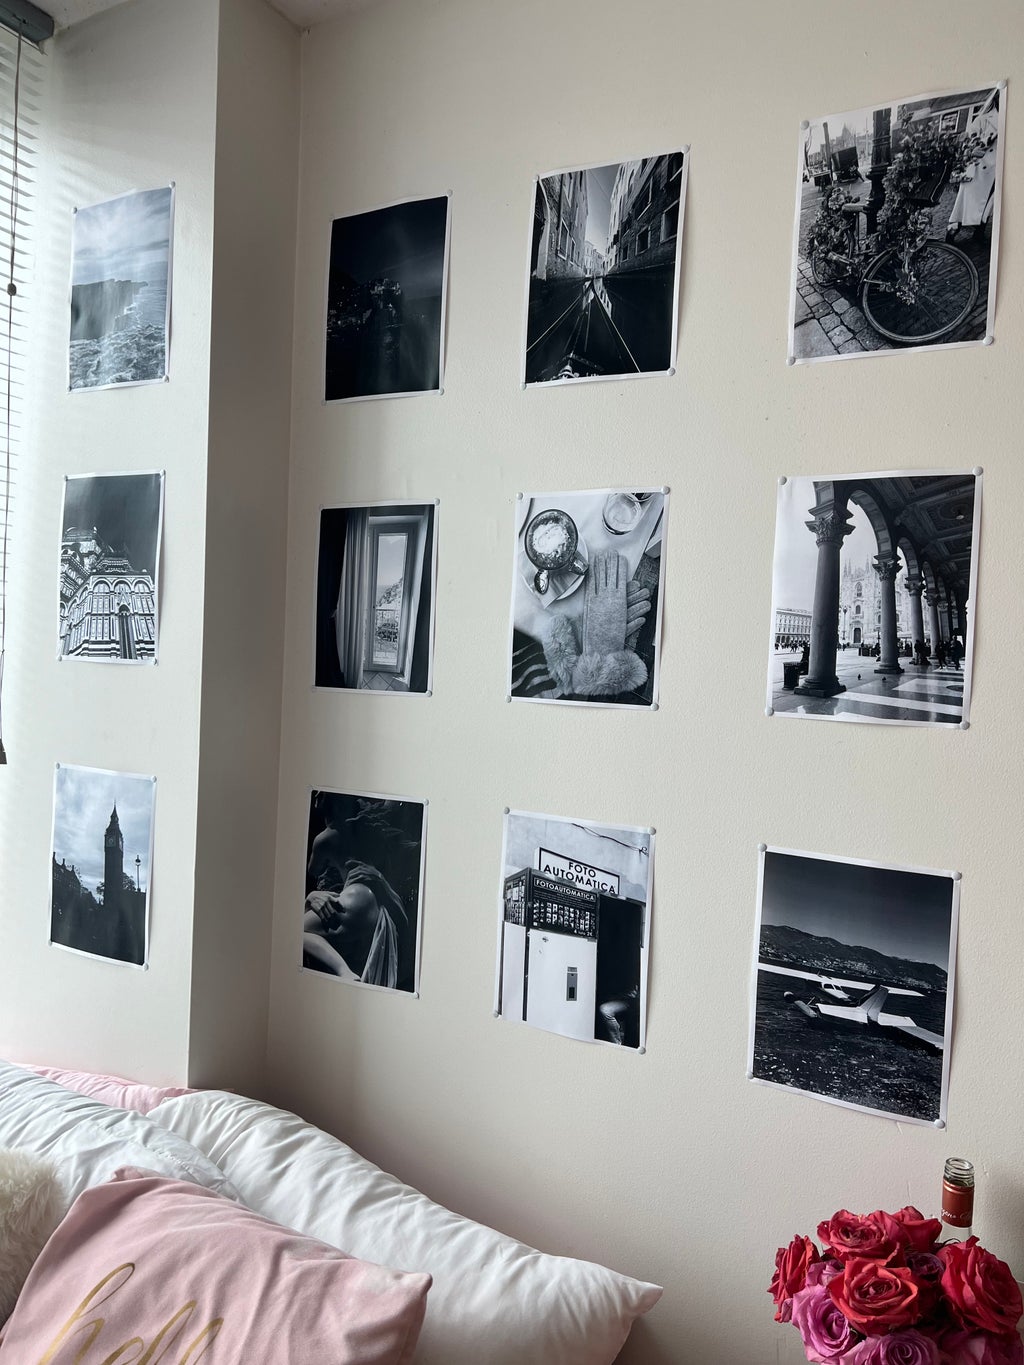 Black and White photo wall decor (photo reference for what is mentioned in article)